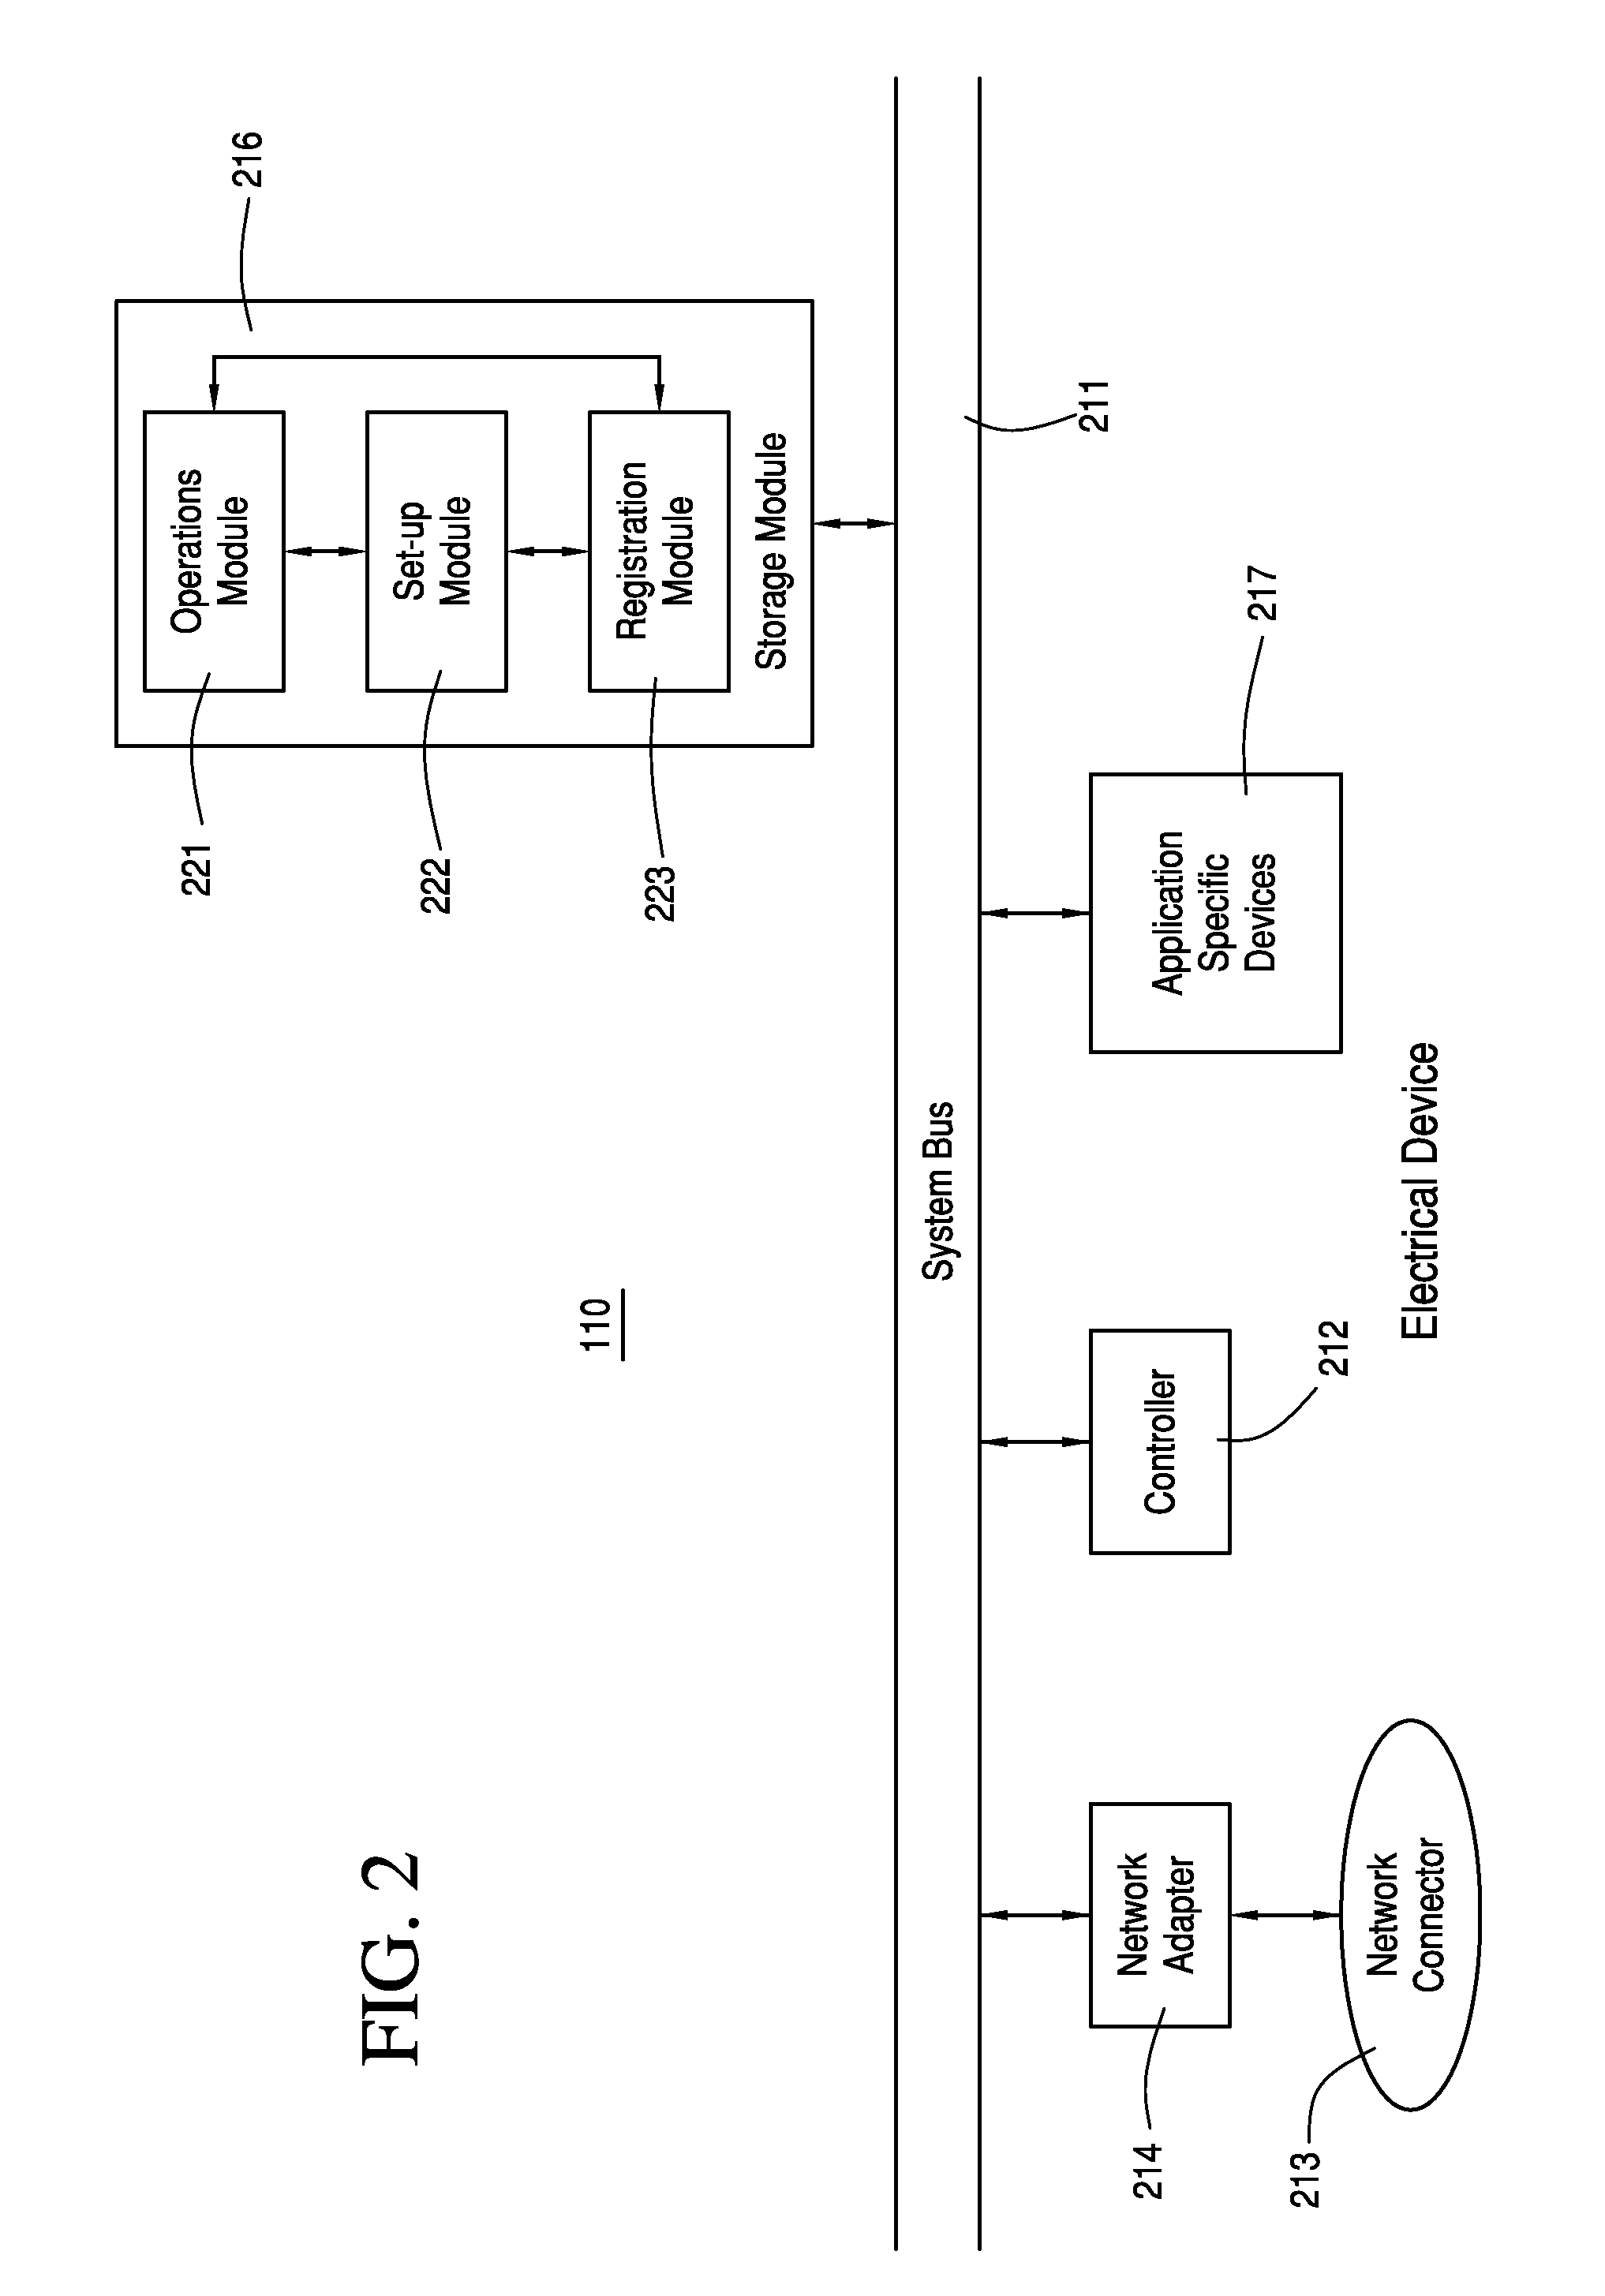 Method of Distributing Information Regarding One or More Electrical Devices and System for the Same